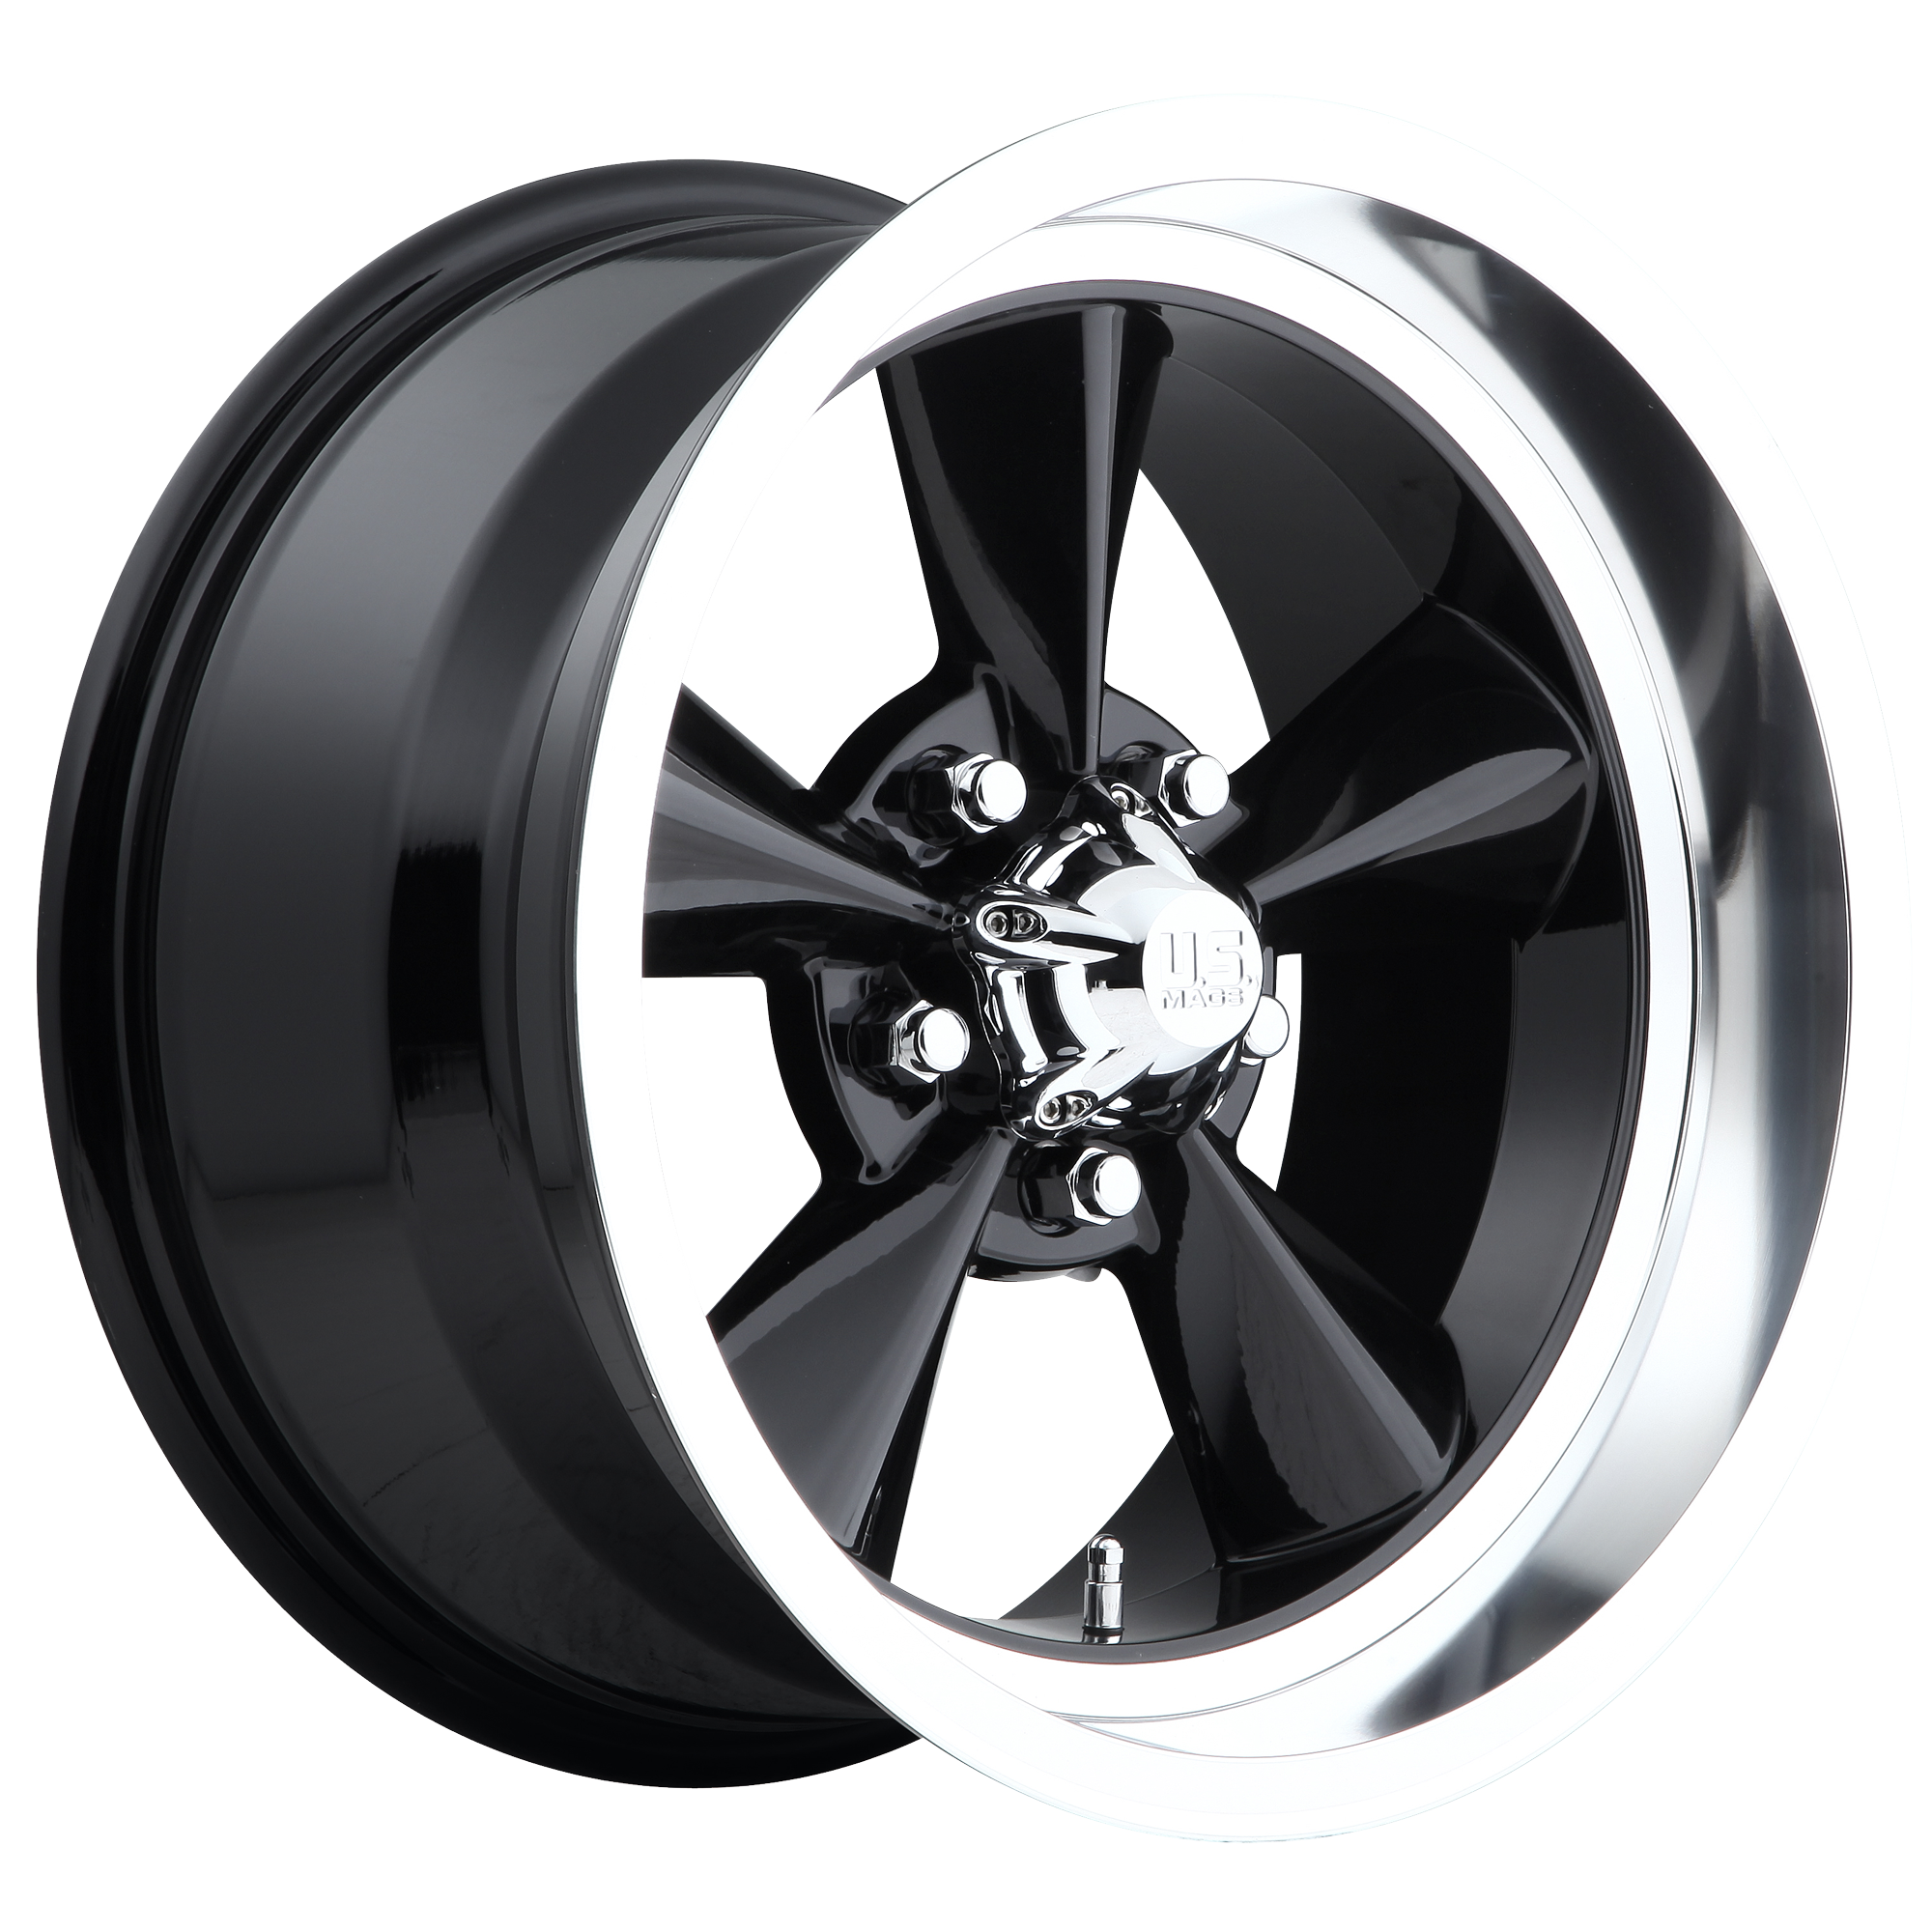 STANDARD 15x7 5x114.30 GLOSS BLACK (-5 mm) - Tires and Engine Performance